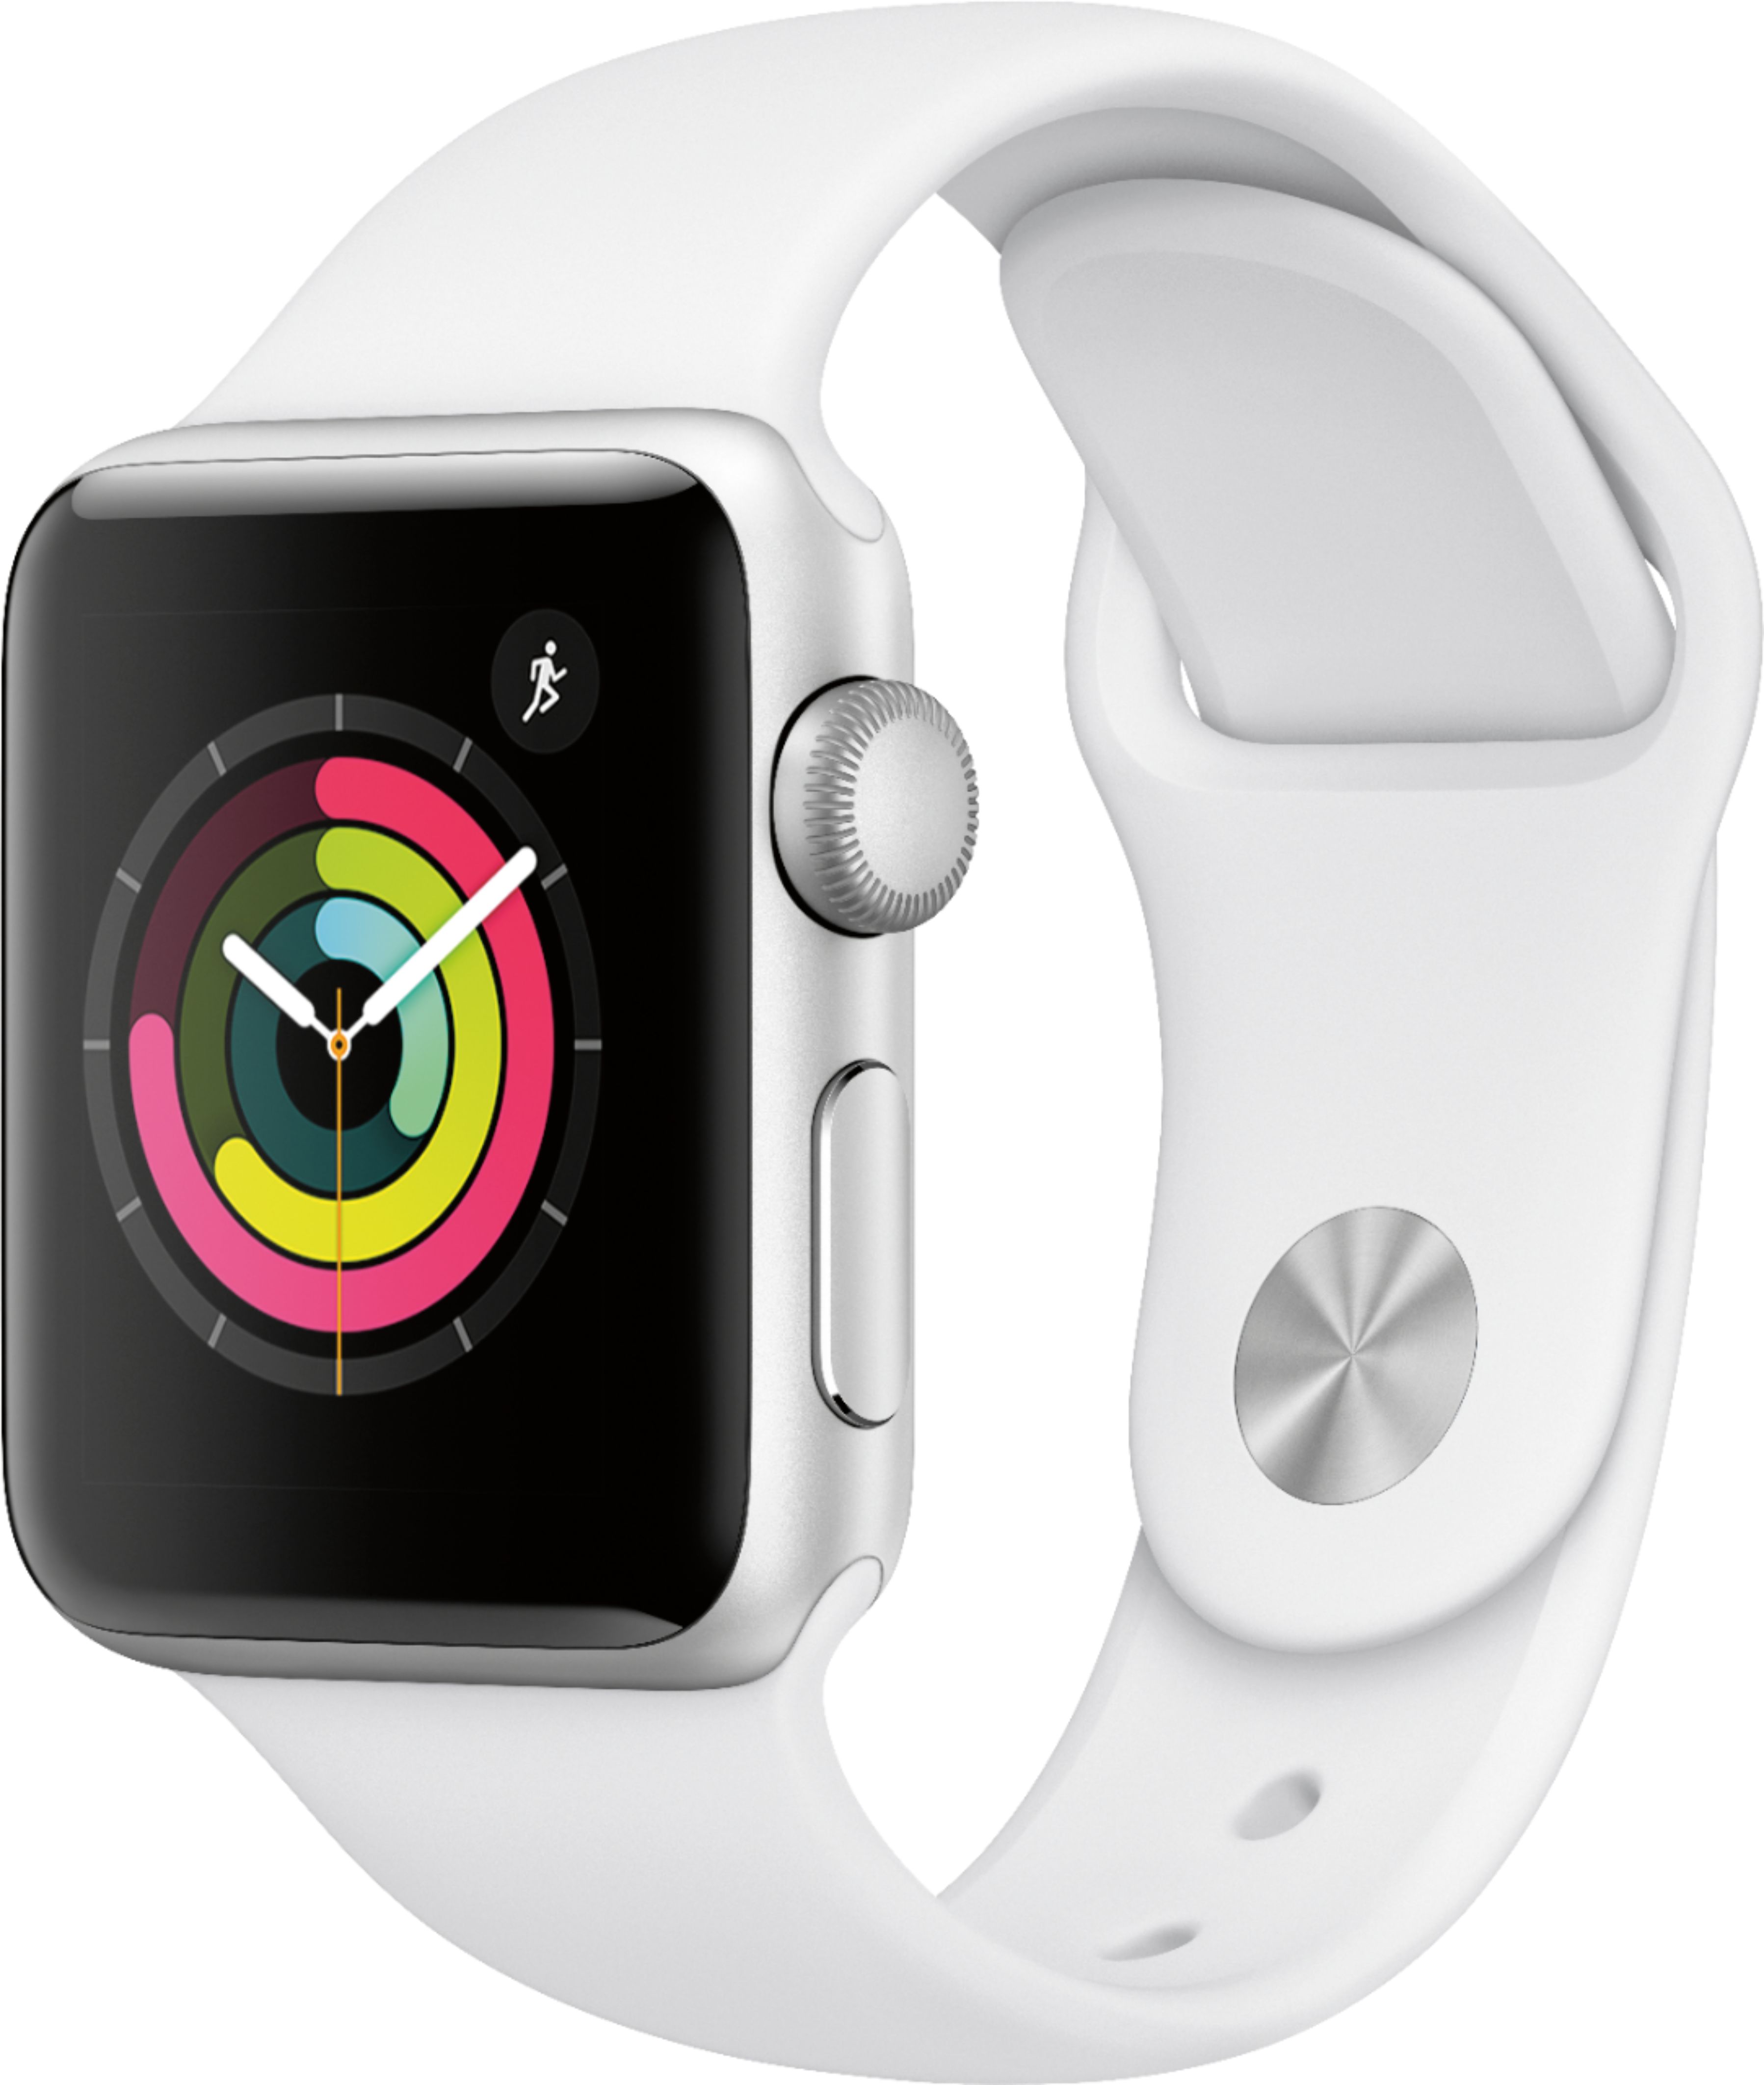 Apple Watch Series 3 (GPS) 38mm Aluminum Case with White Sport Band - Silver Aluminum